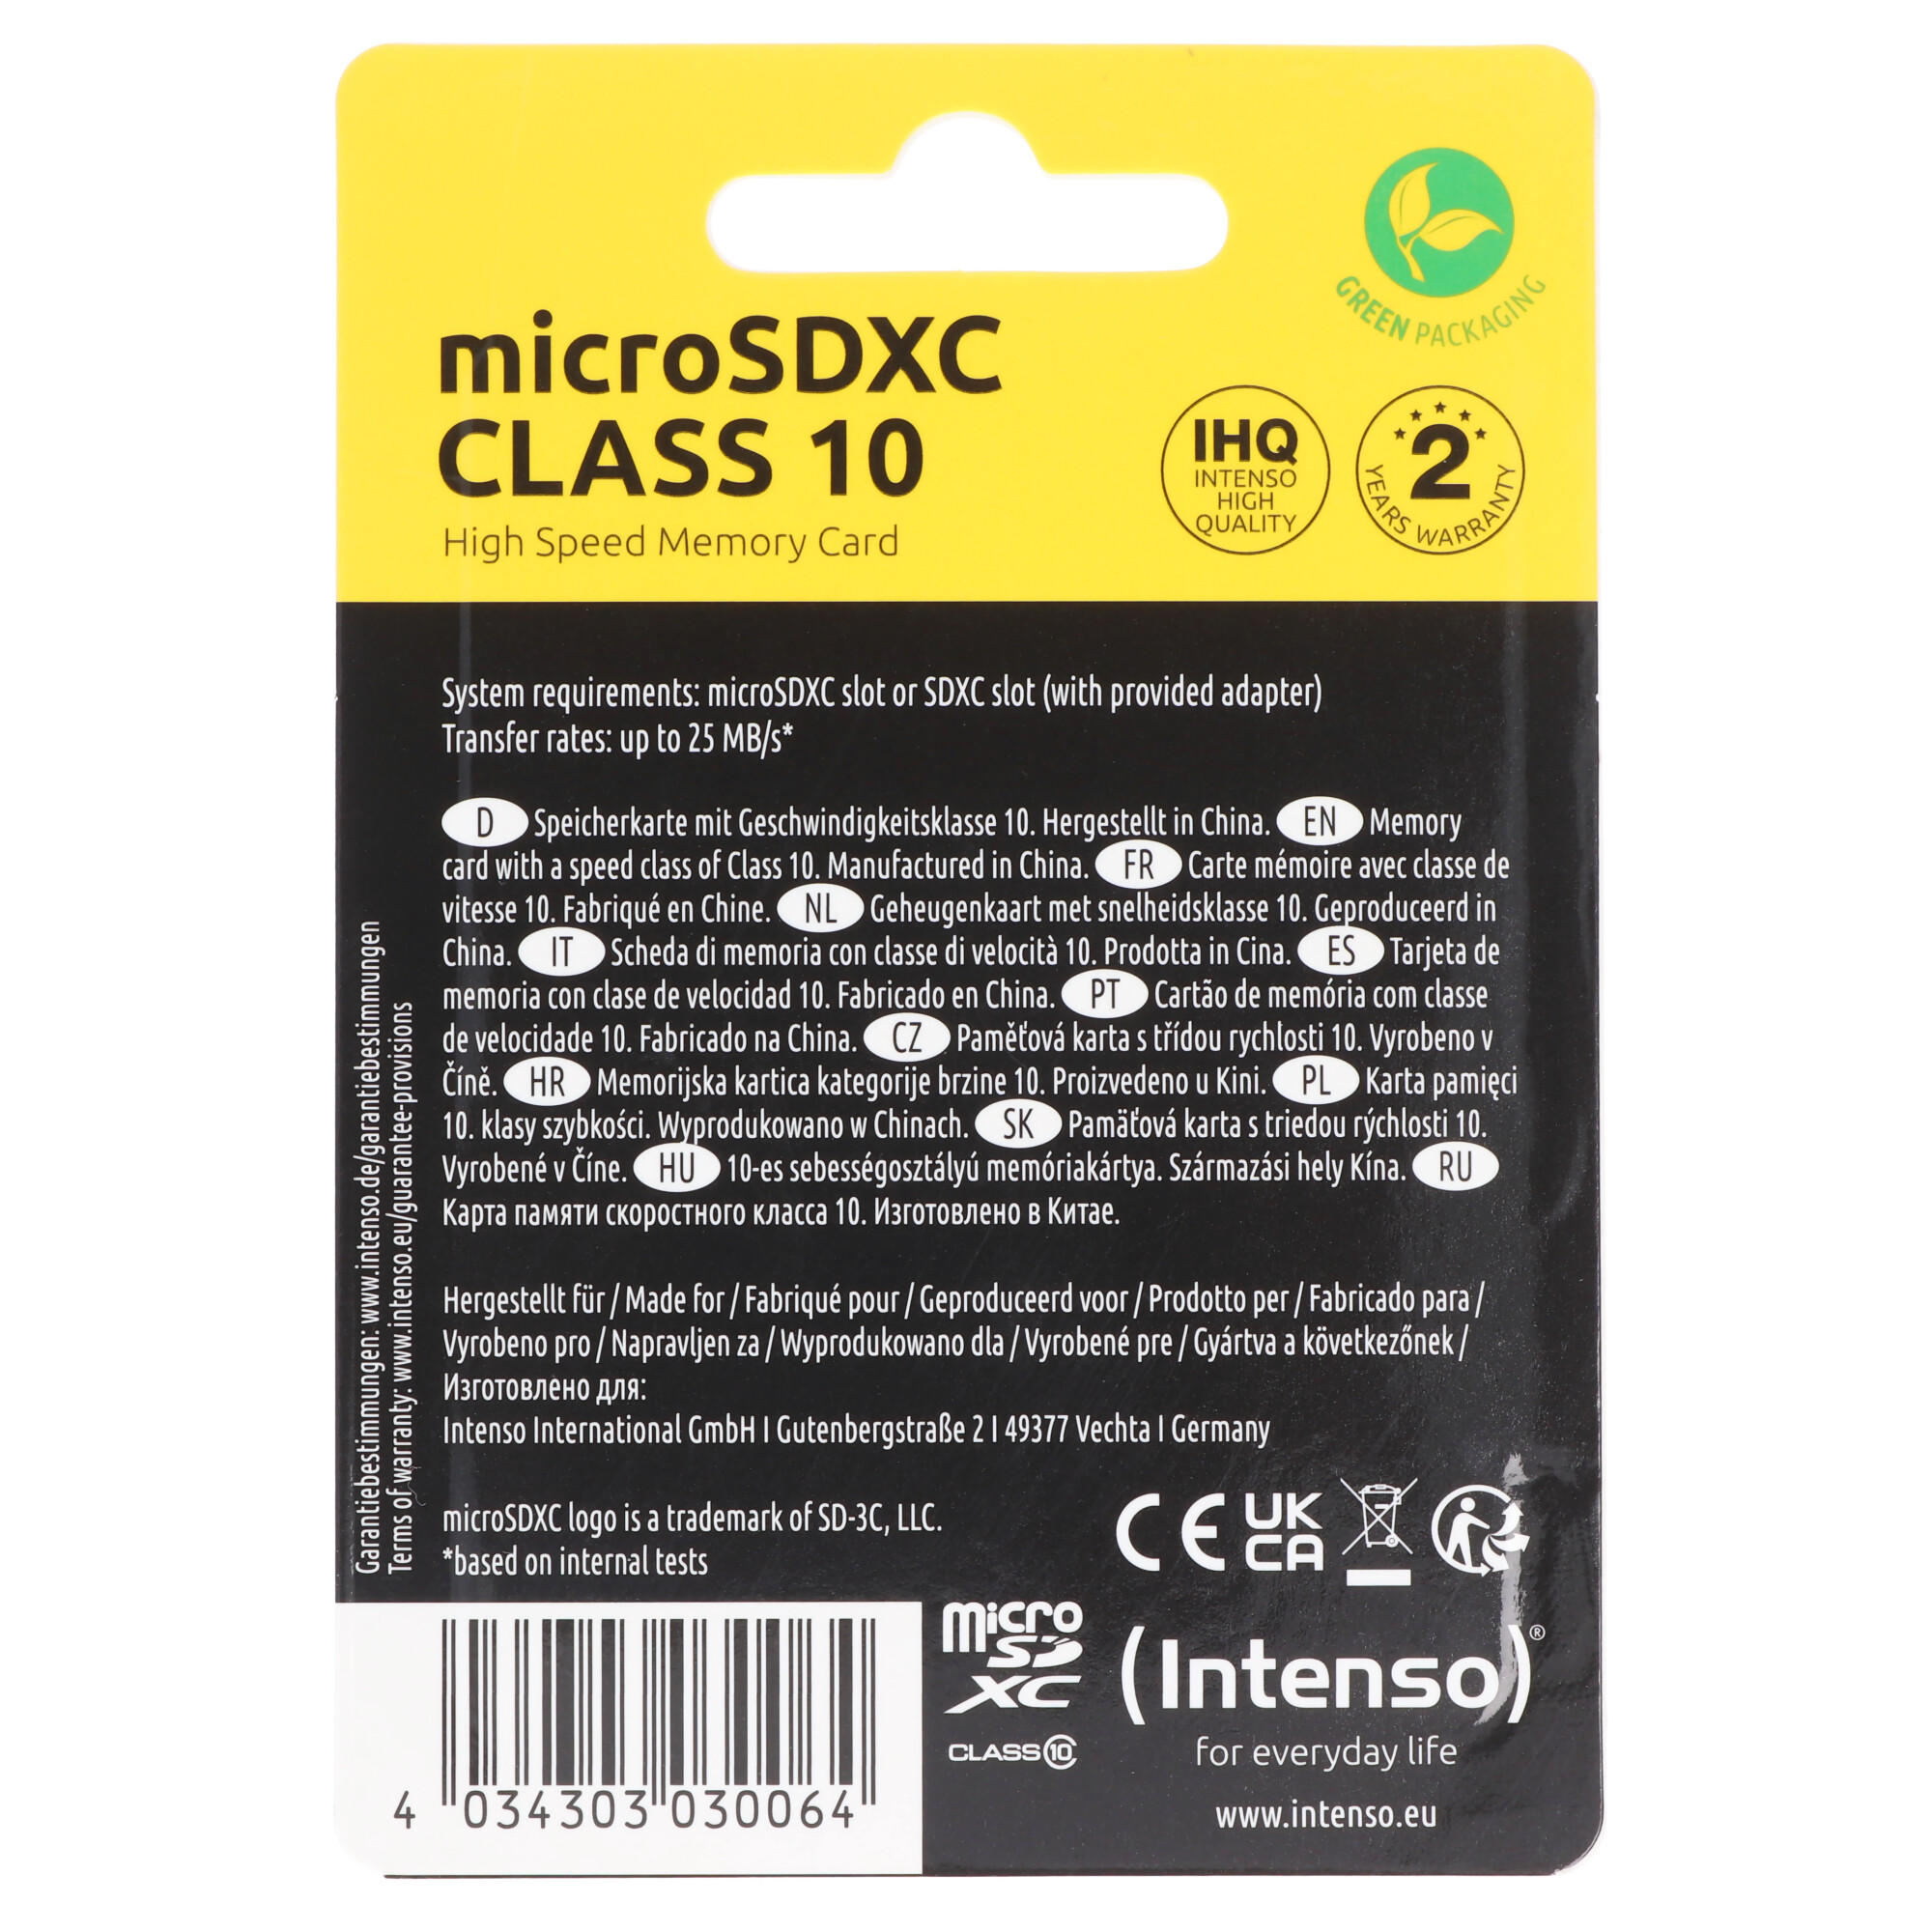 Intenso microSDXC Card 128GB, Class 10 (R) 25MB/s, (W) 10MB/s, SD-Adapter, Retail-Blister